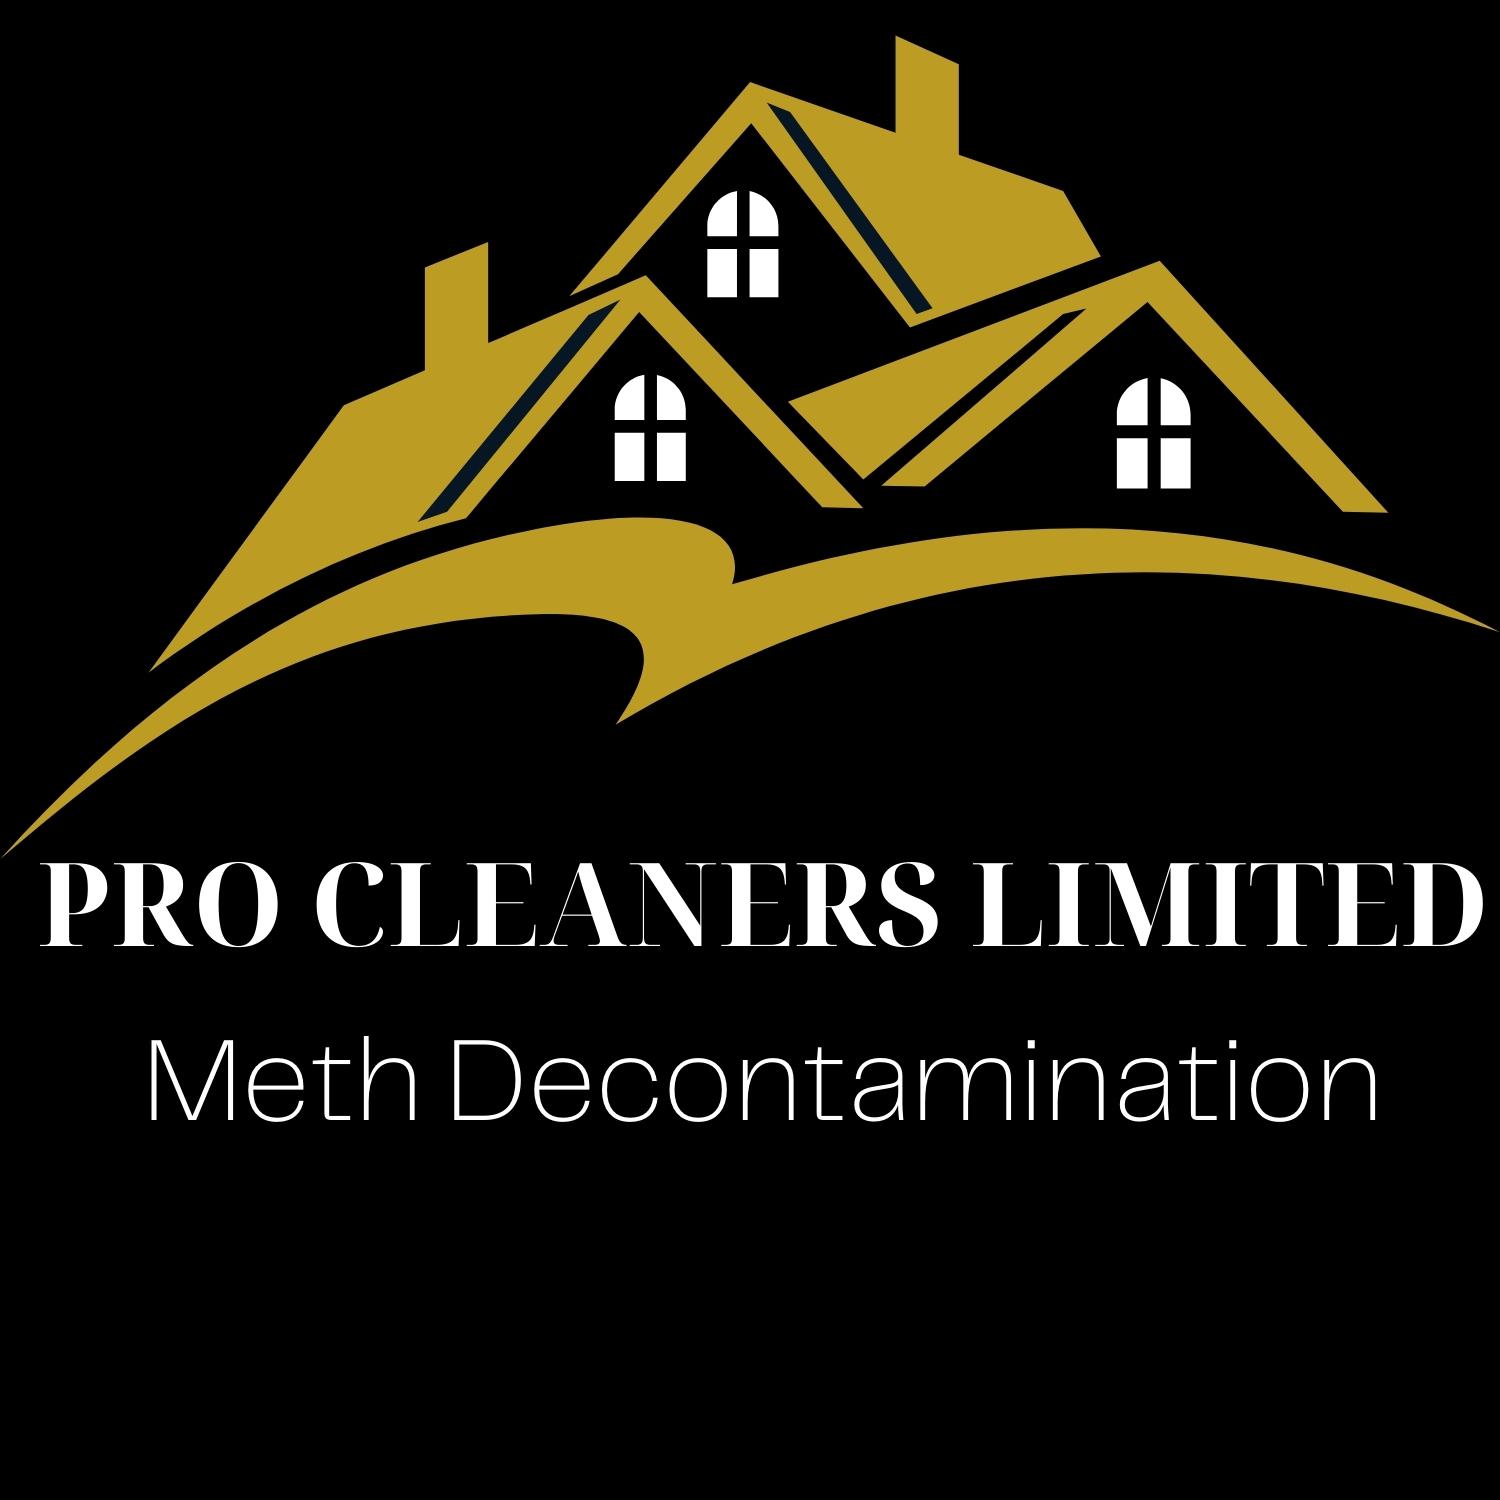 Pro Cleaners Limited Logo